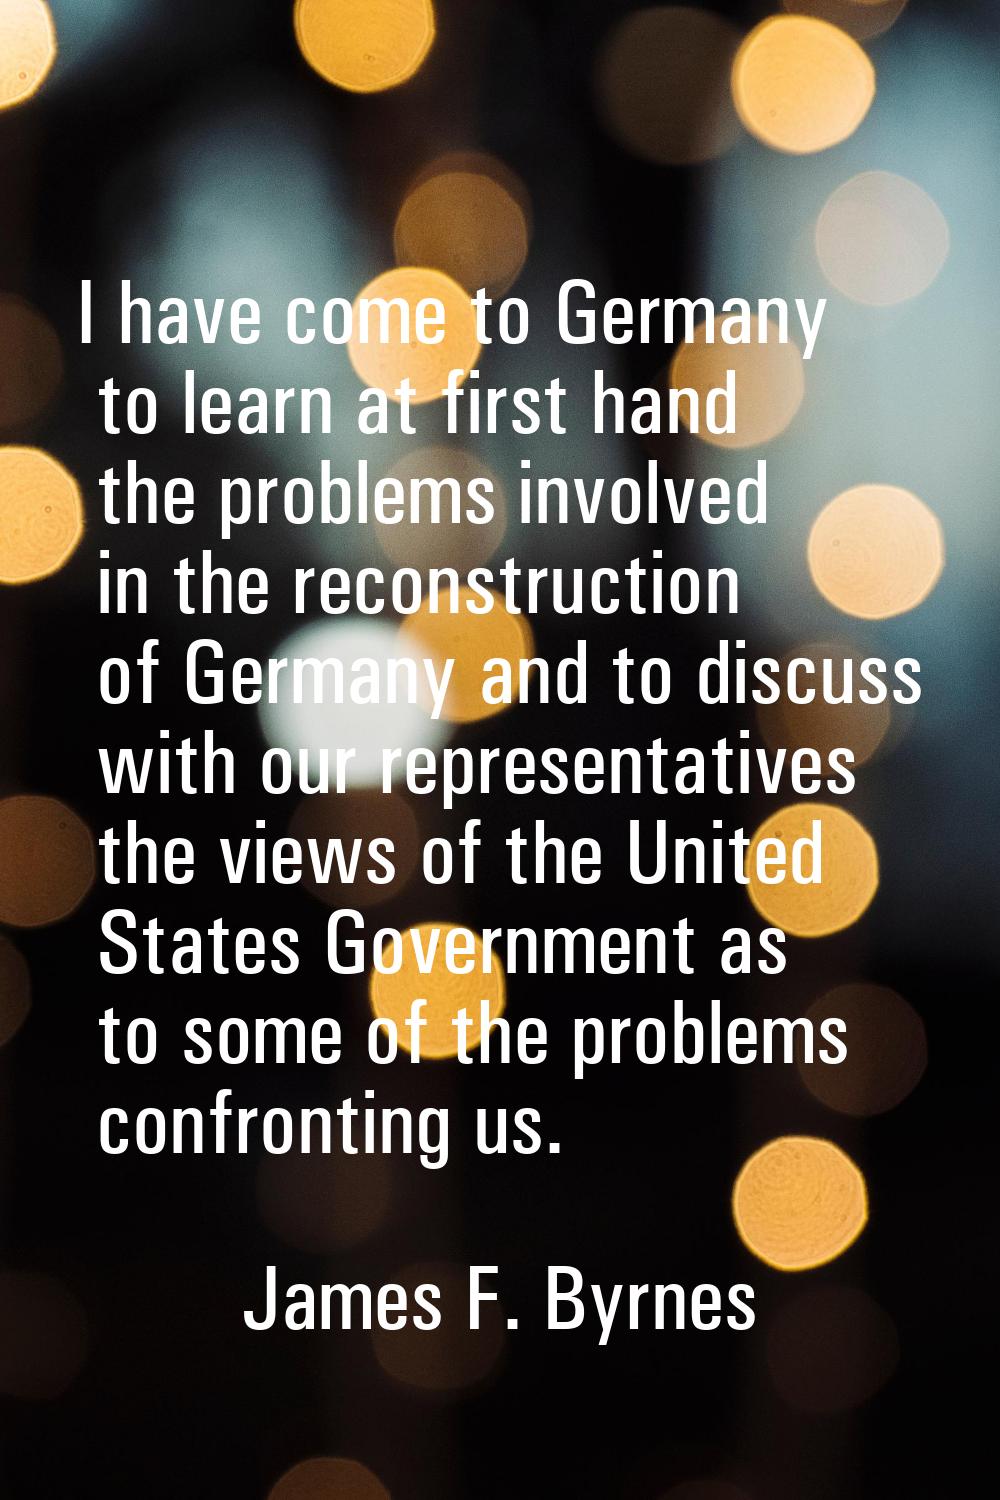 I have come to Germany to learn at first hand the problems involved in the reconstruction of German